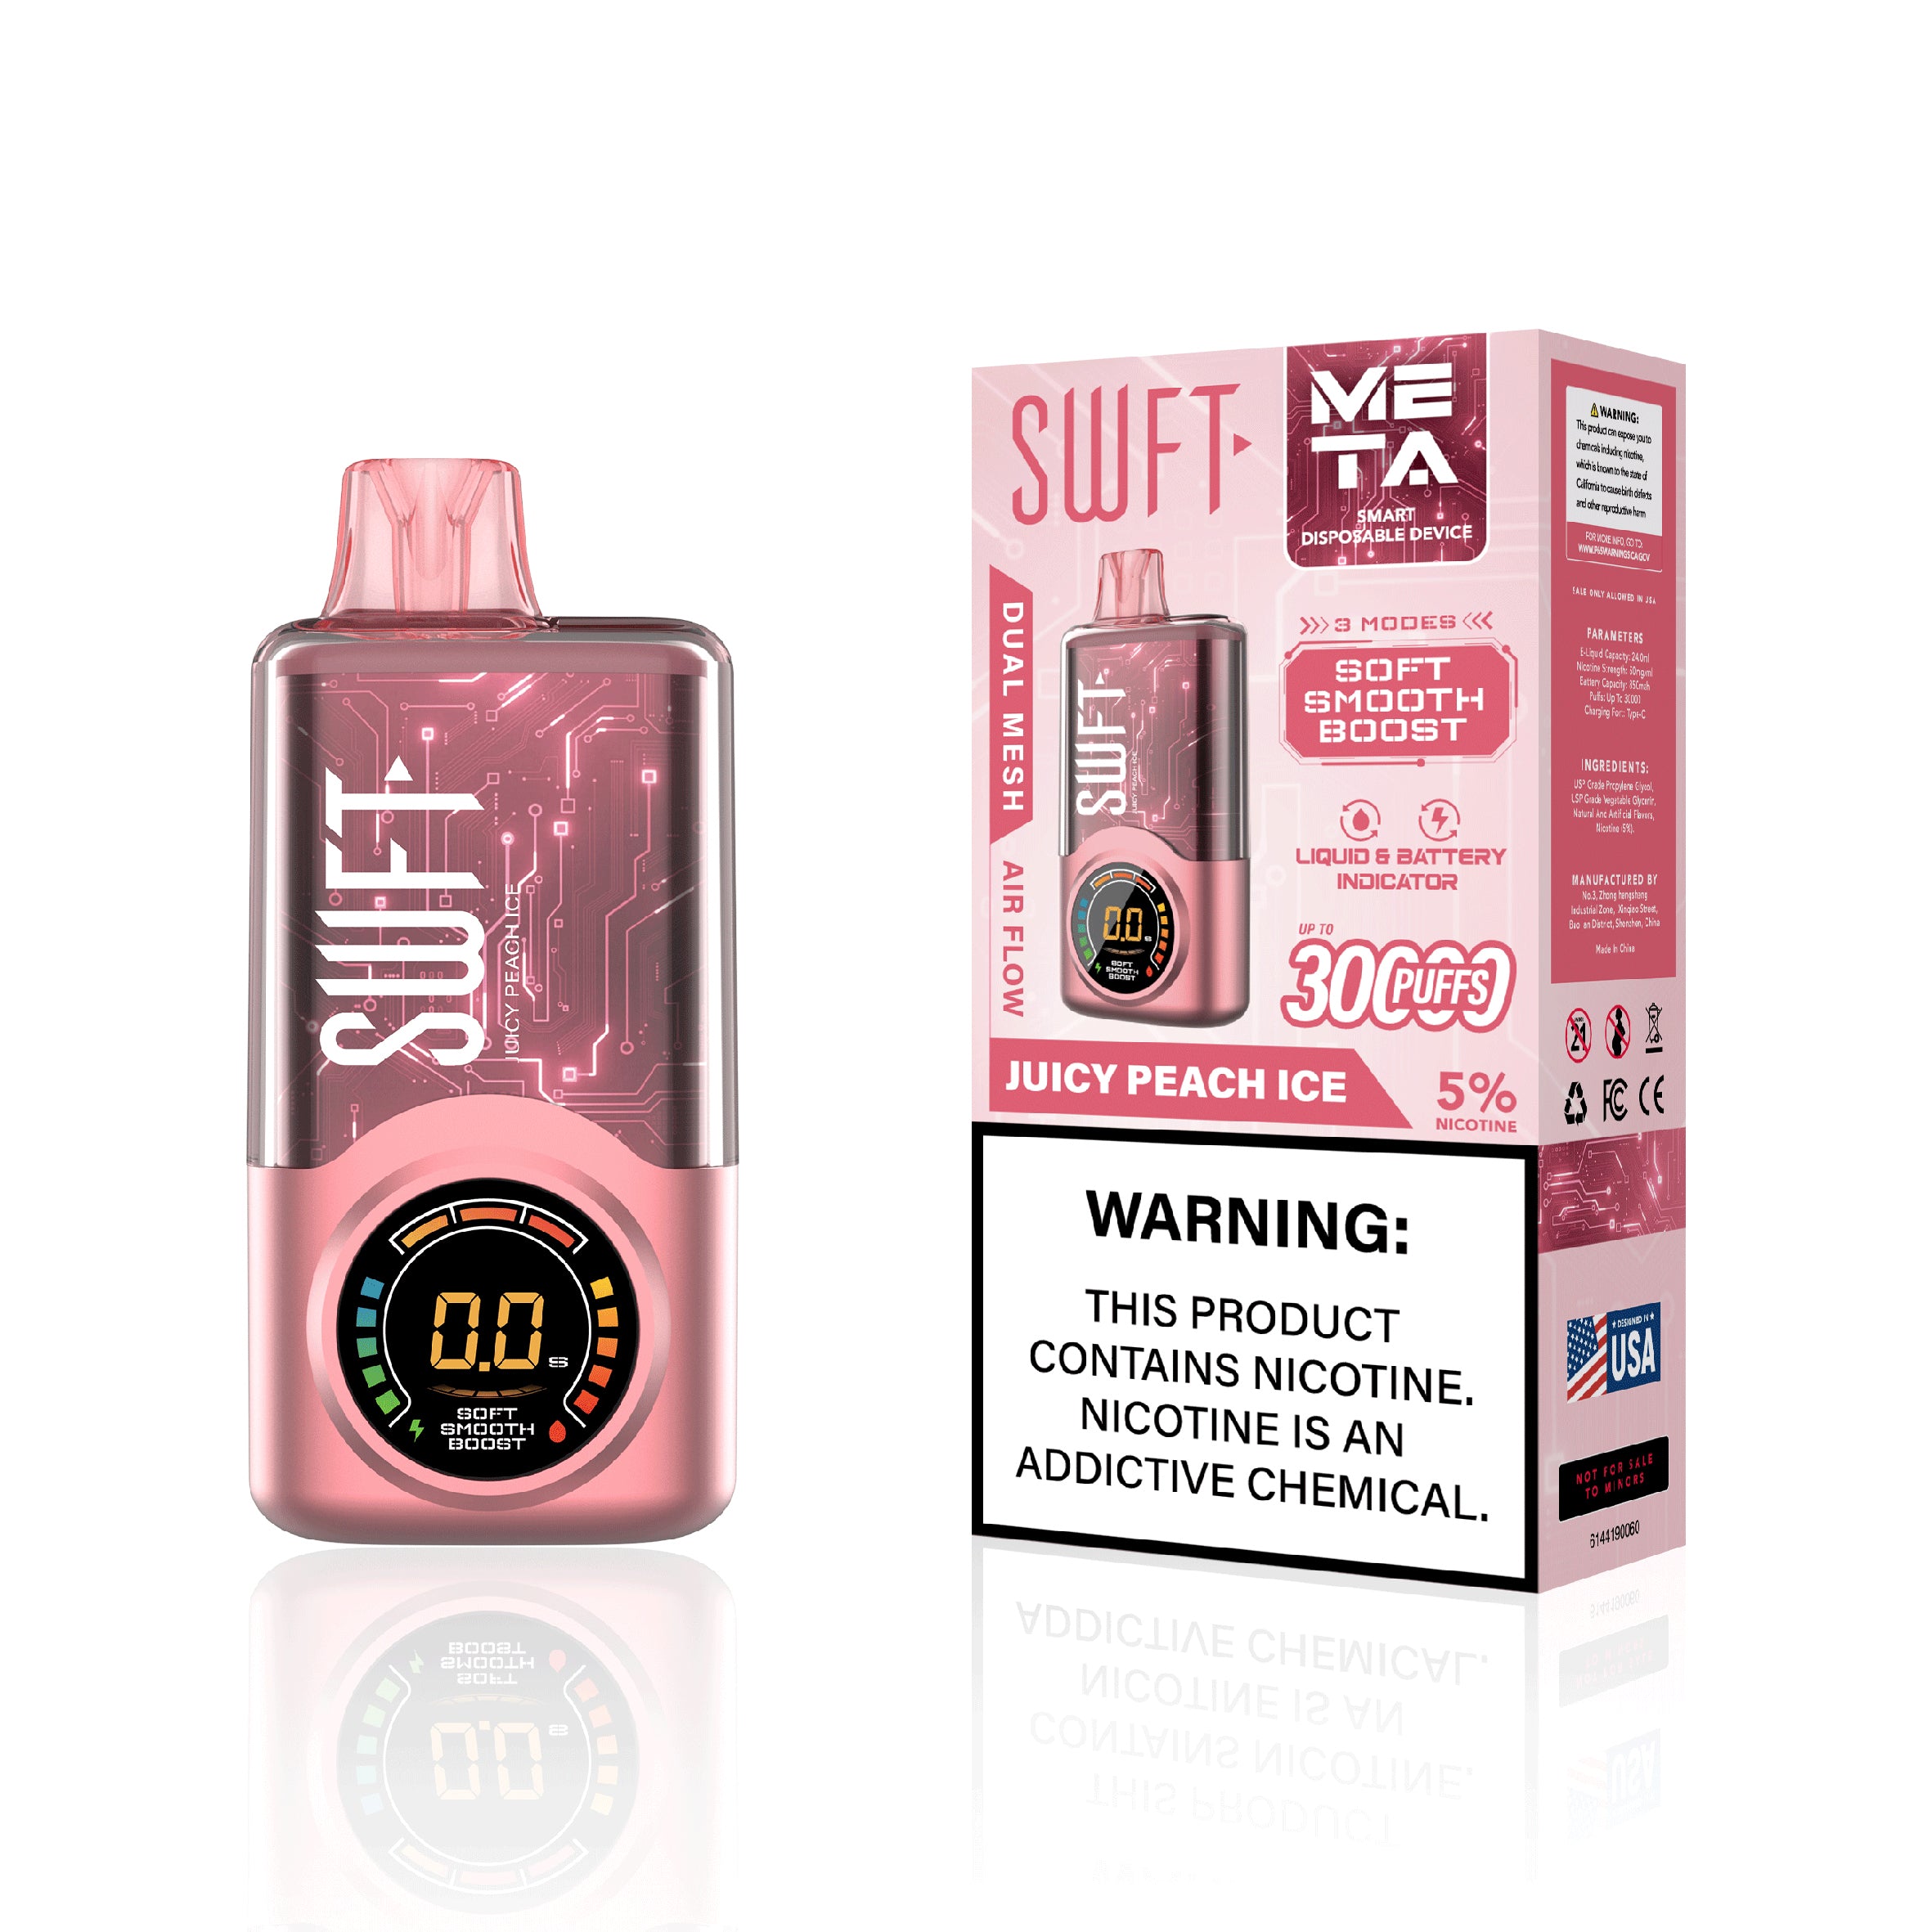 SWFT META 30000 PUFFS ADJUSTABLE WATTAGE DISPOSABLE VAPE DEVICE DUAL MESH COIL LIQUID AND BATTERY INDICATOR JUICY PEACH ICE